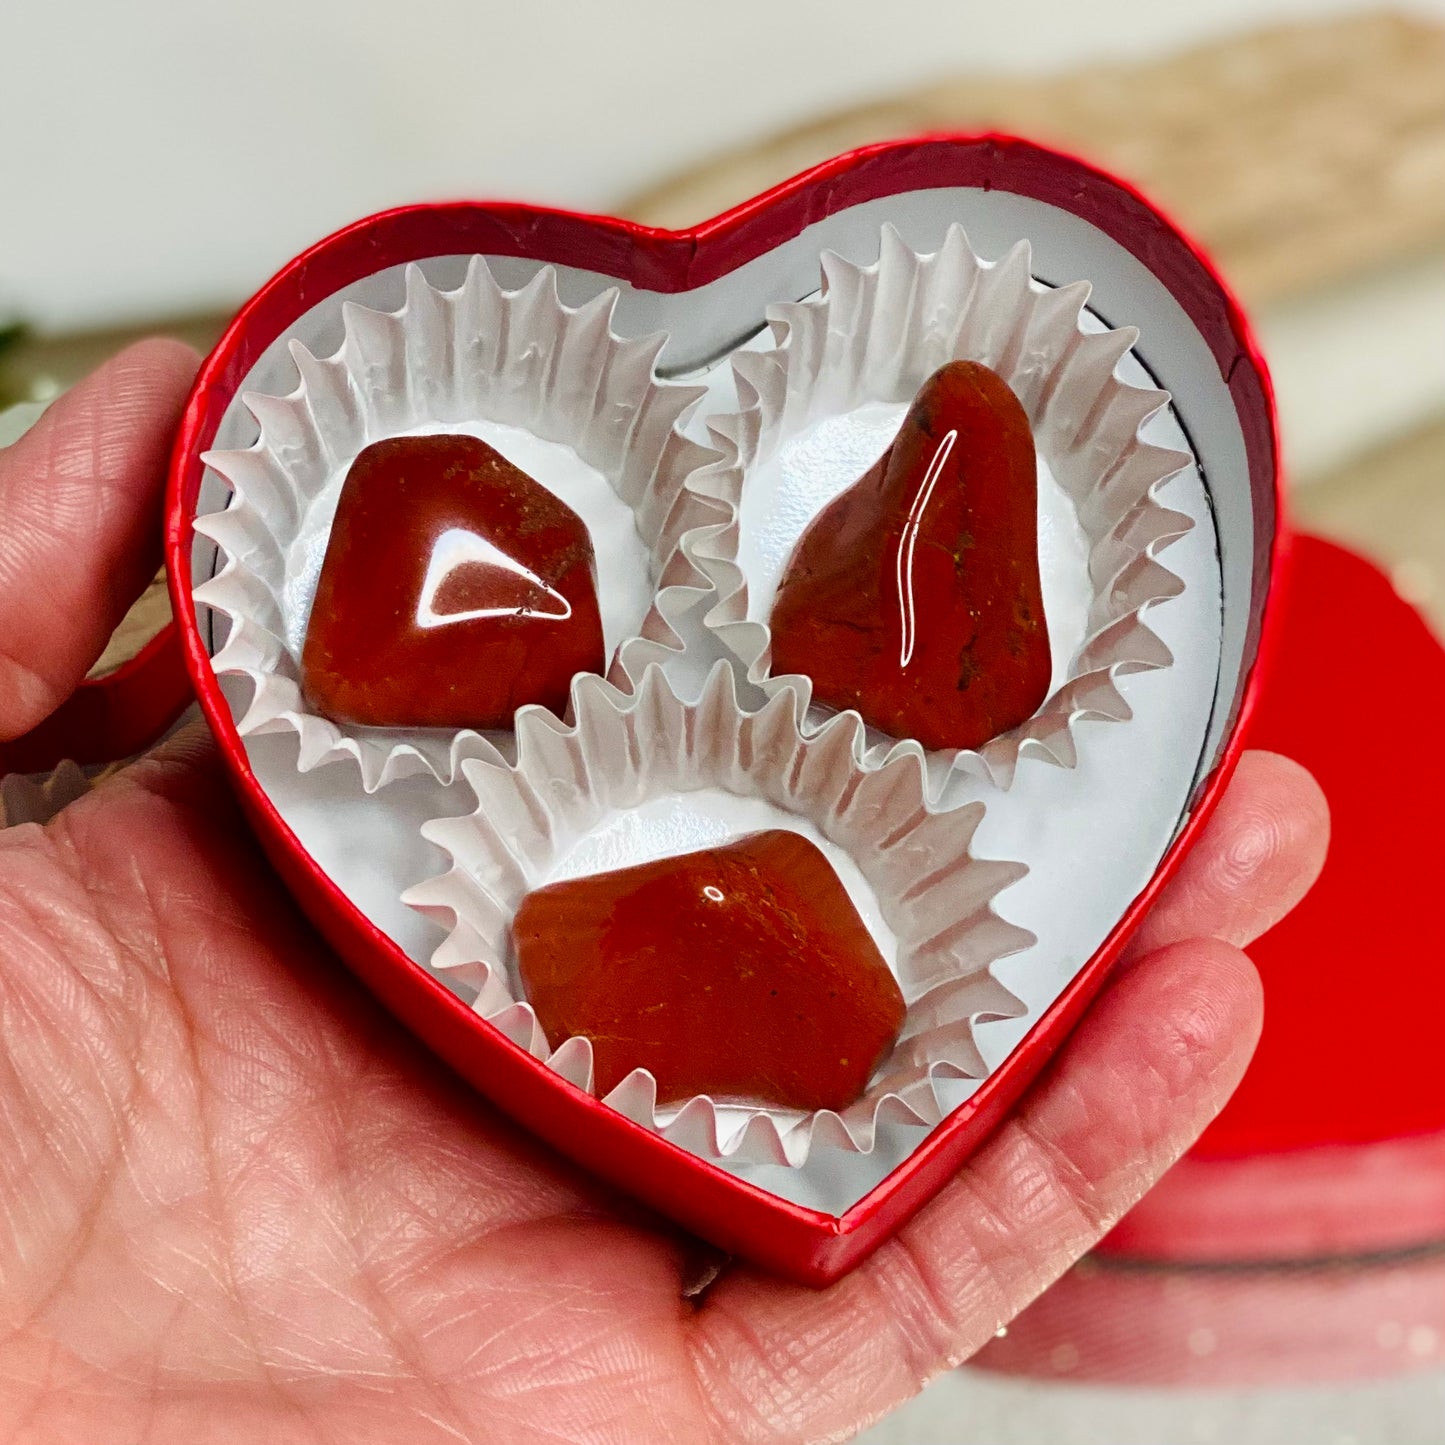 Empower Your Heart: Red Jasper Crystal Gift Box Set for Self-Confidence, Energizing, and Compassion